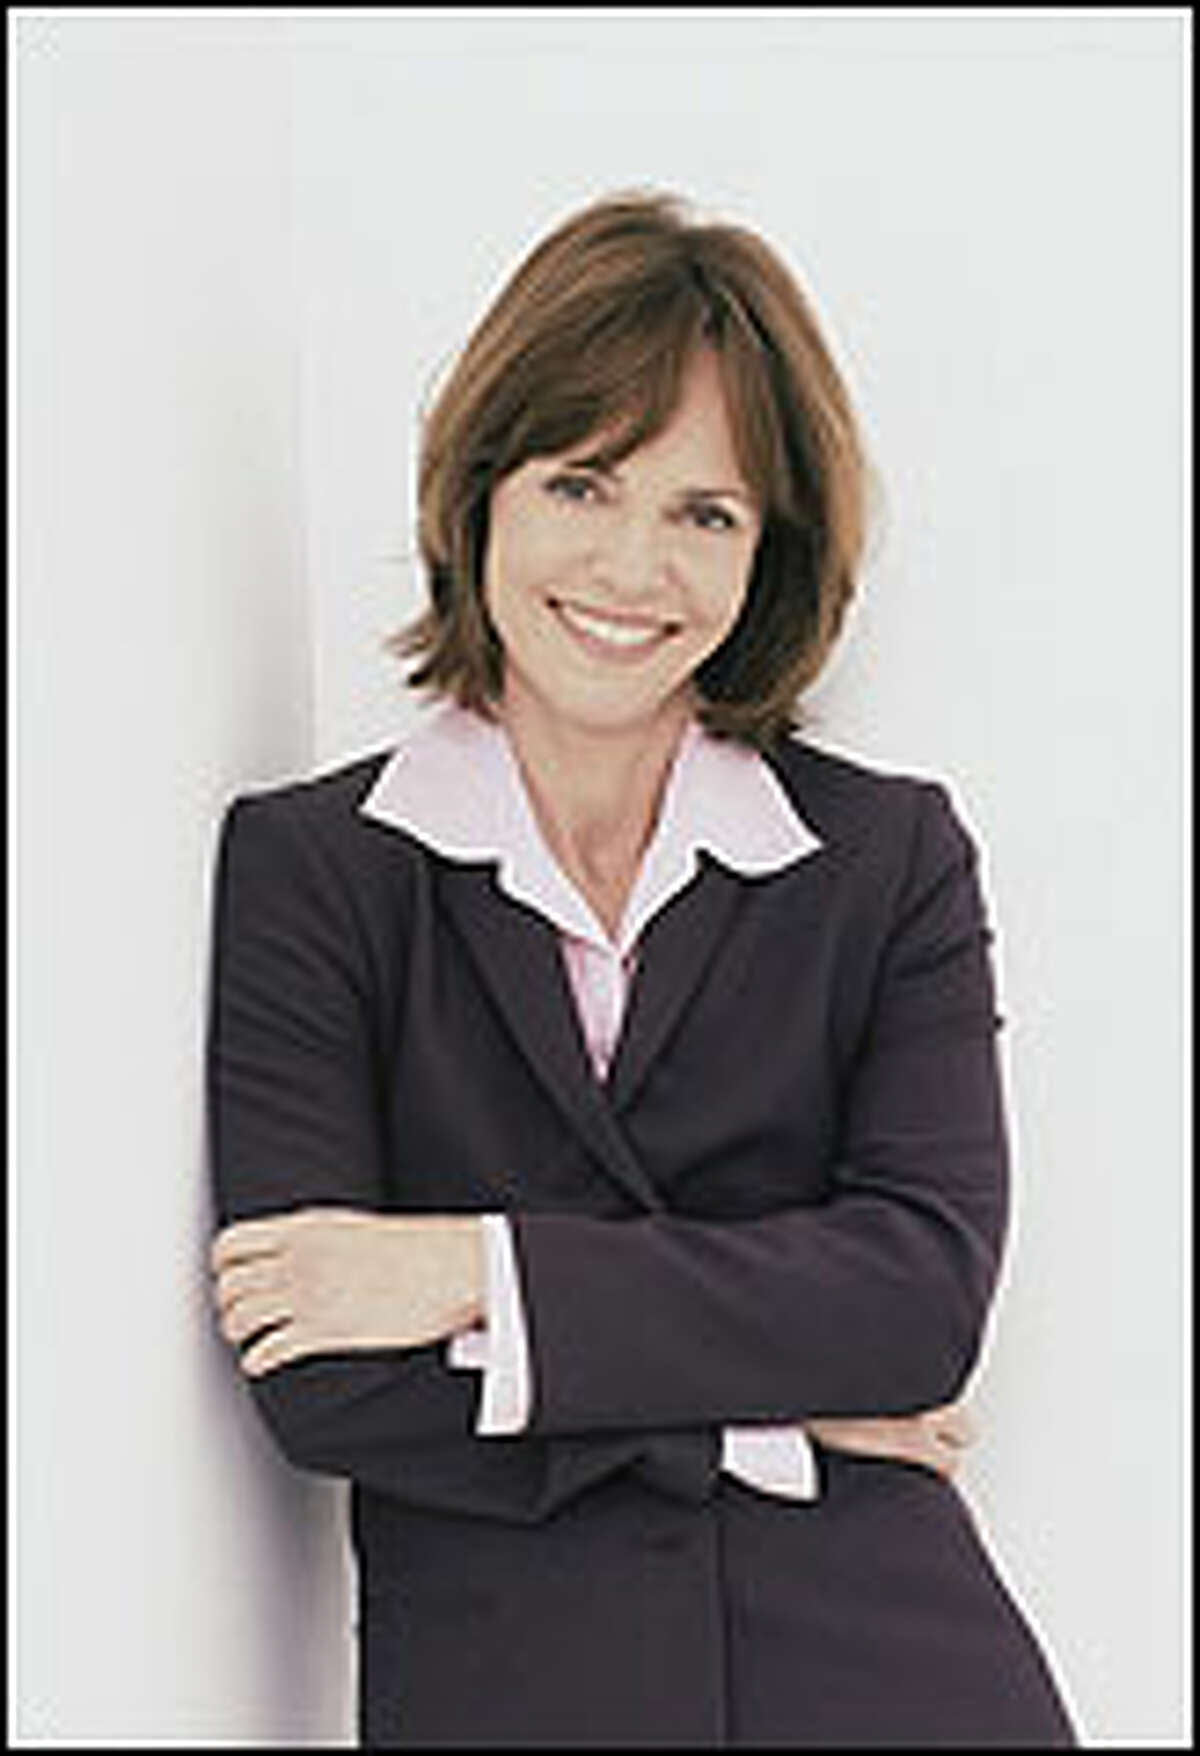 Sally Field stars in ABC's "The Court."